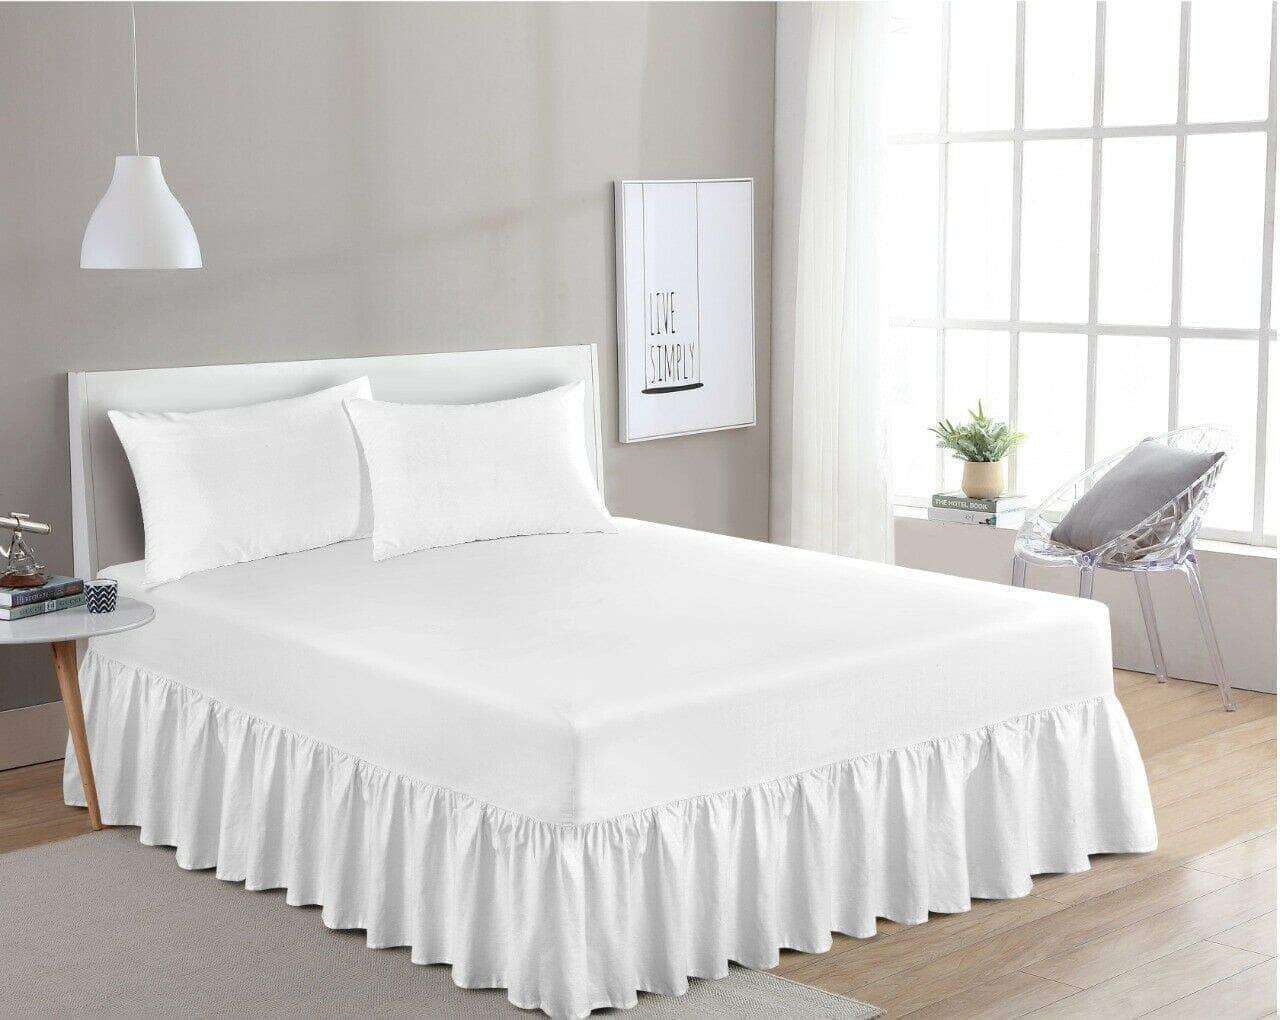 fitted sheet with valance attached